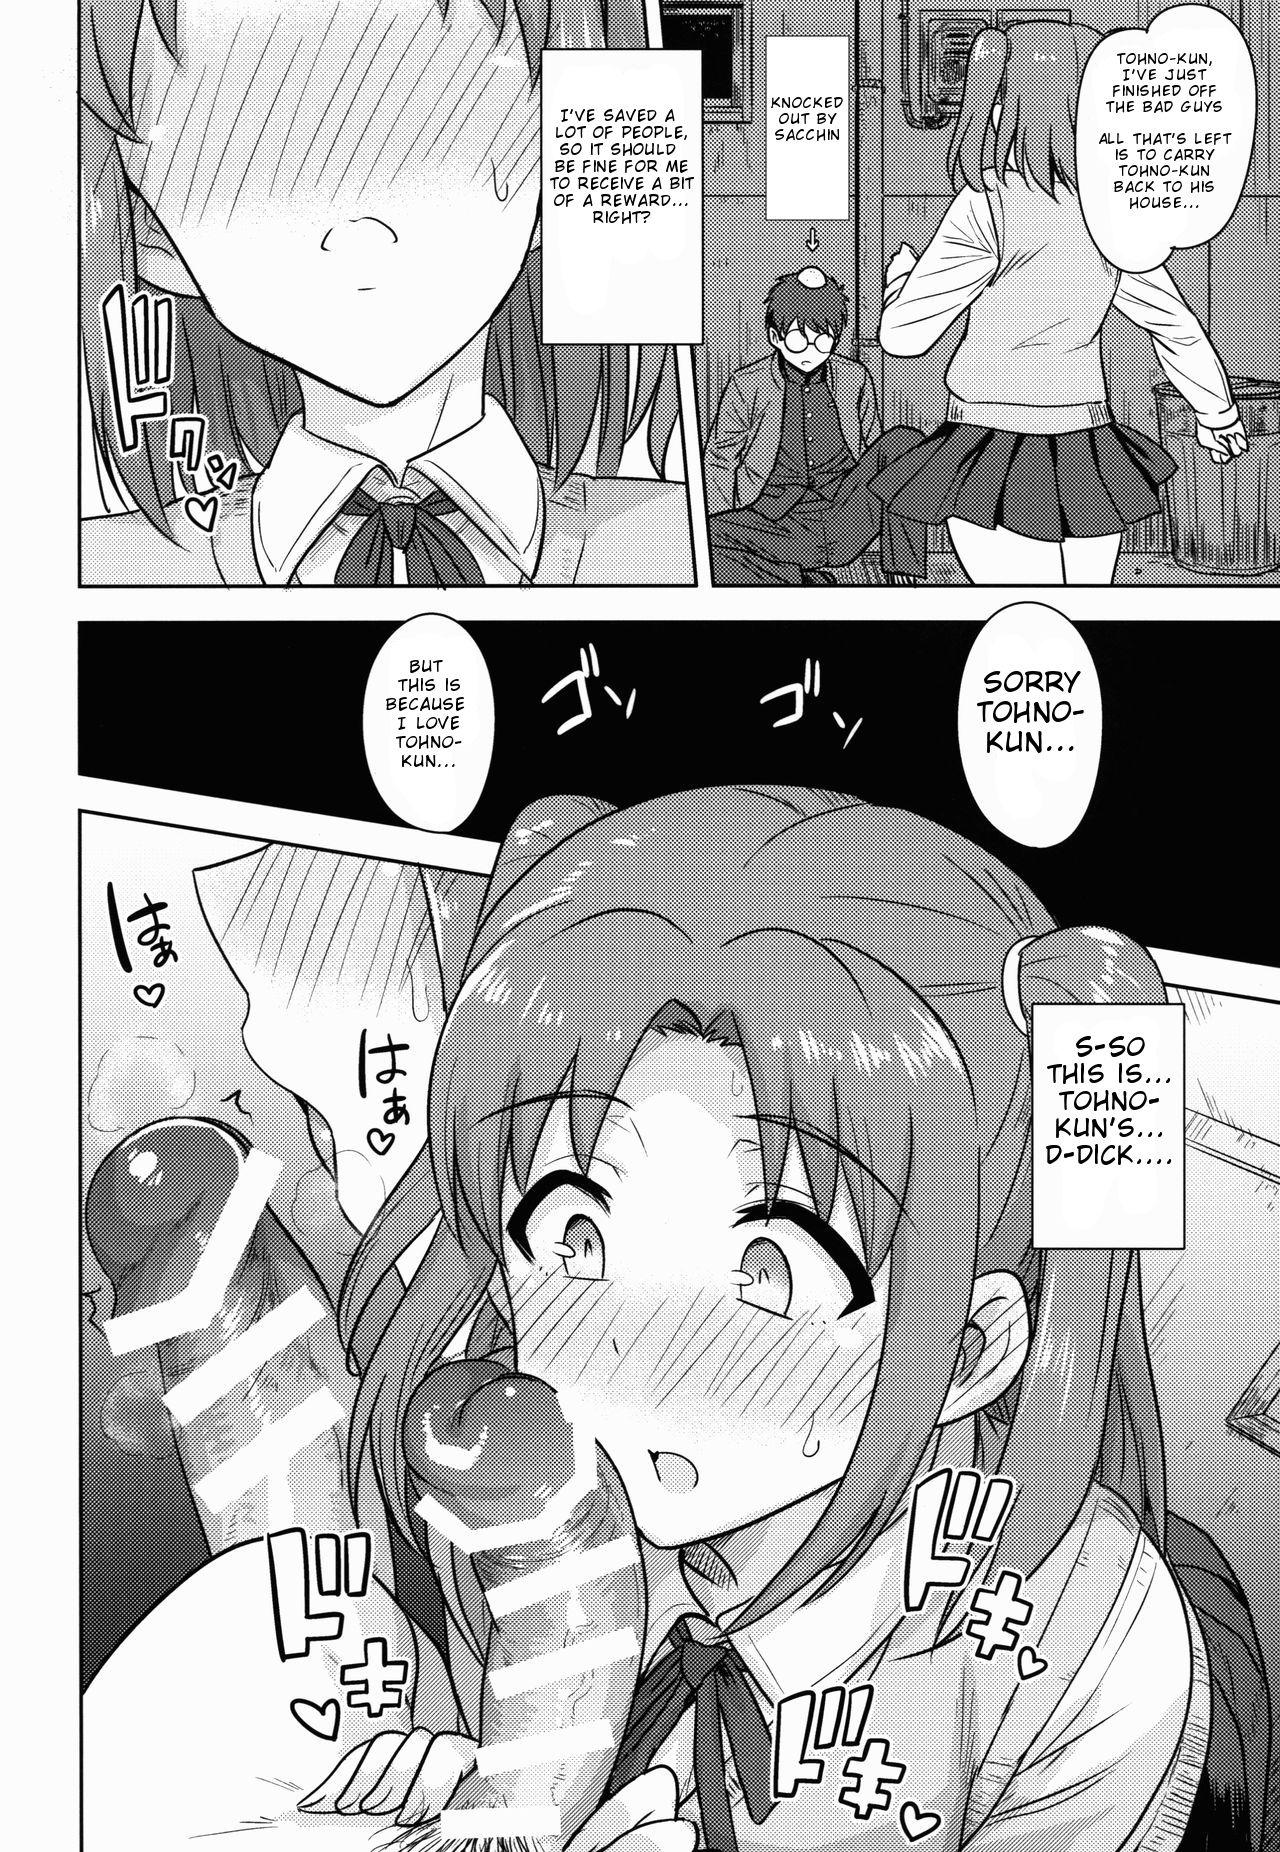 Handsome Aru Hi no Futari MelBlo Hen | A Certain Day with Each Other Melty Blood Hen - Tsukihime Full - Page 10